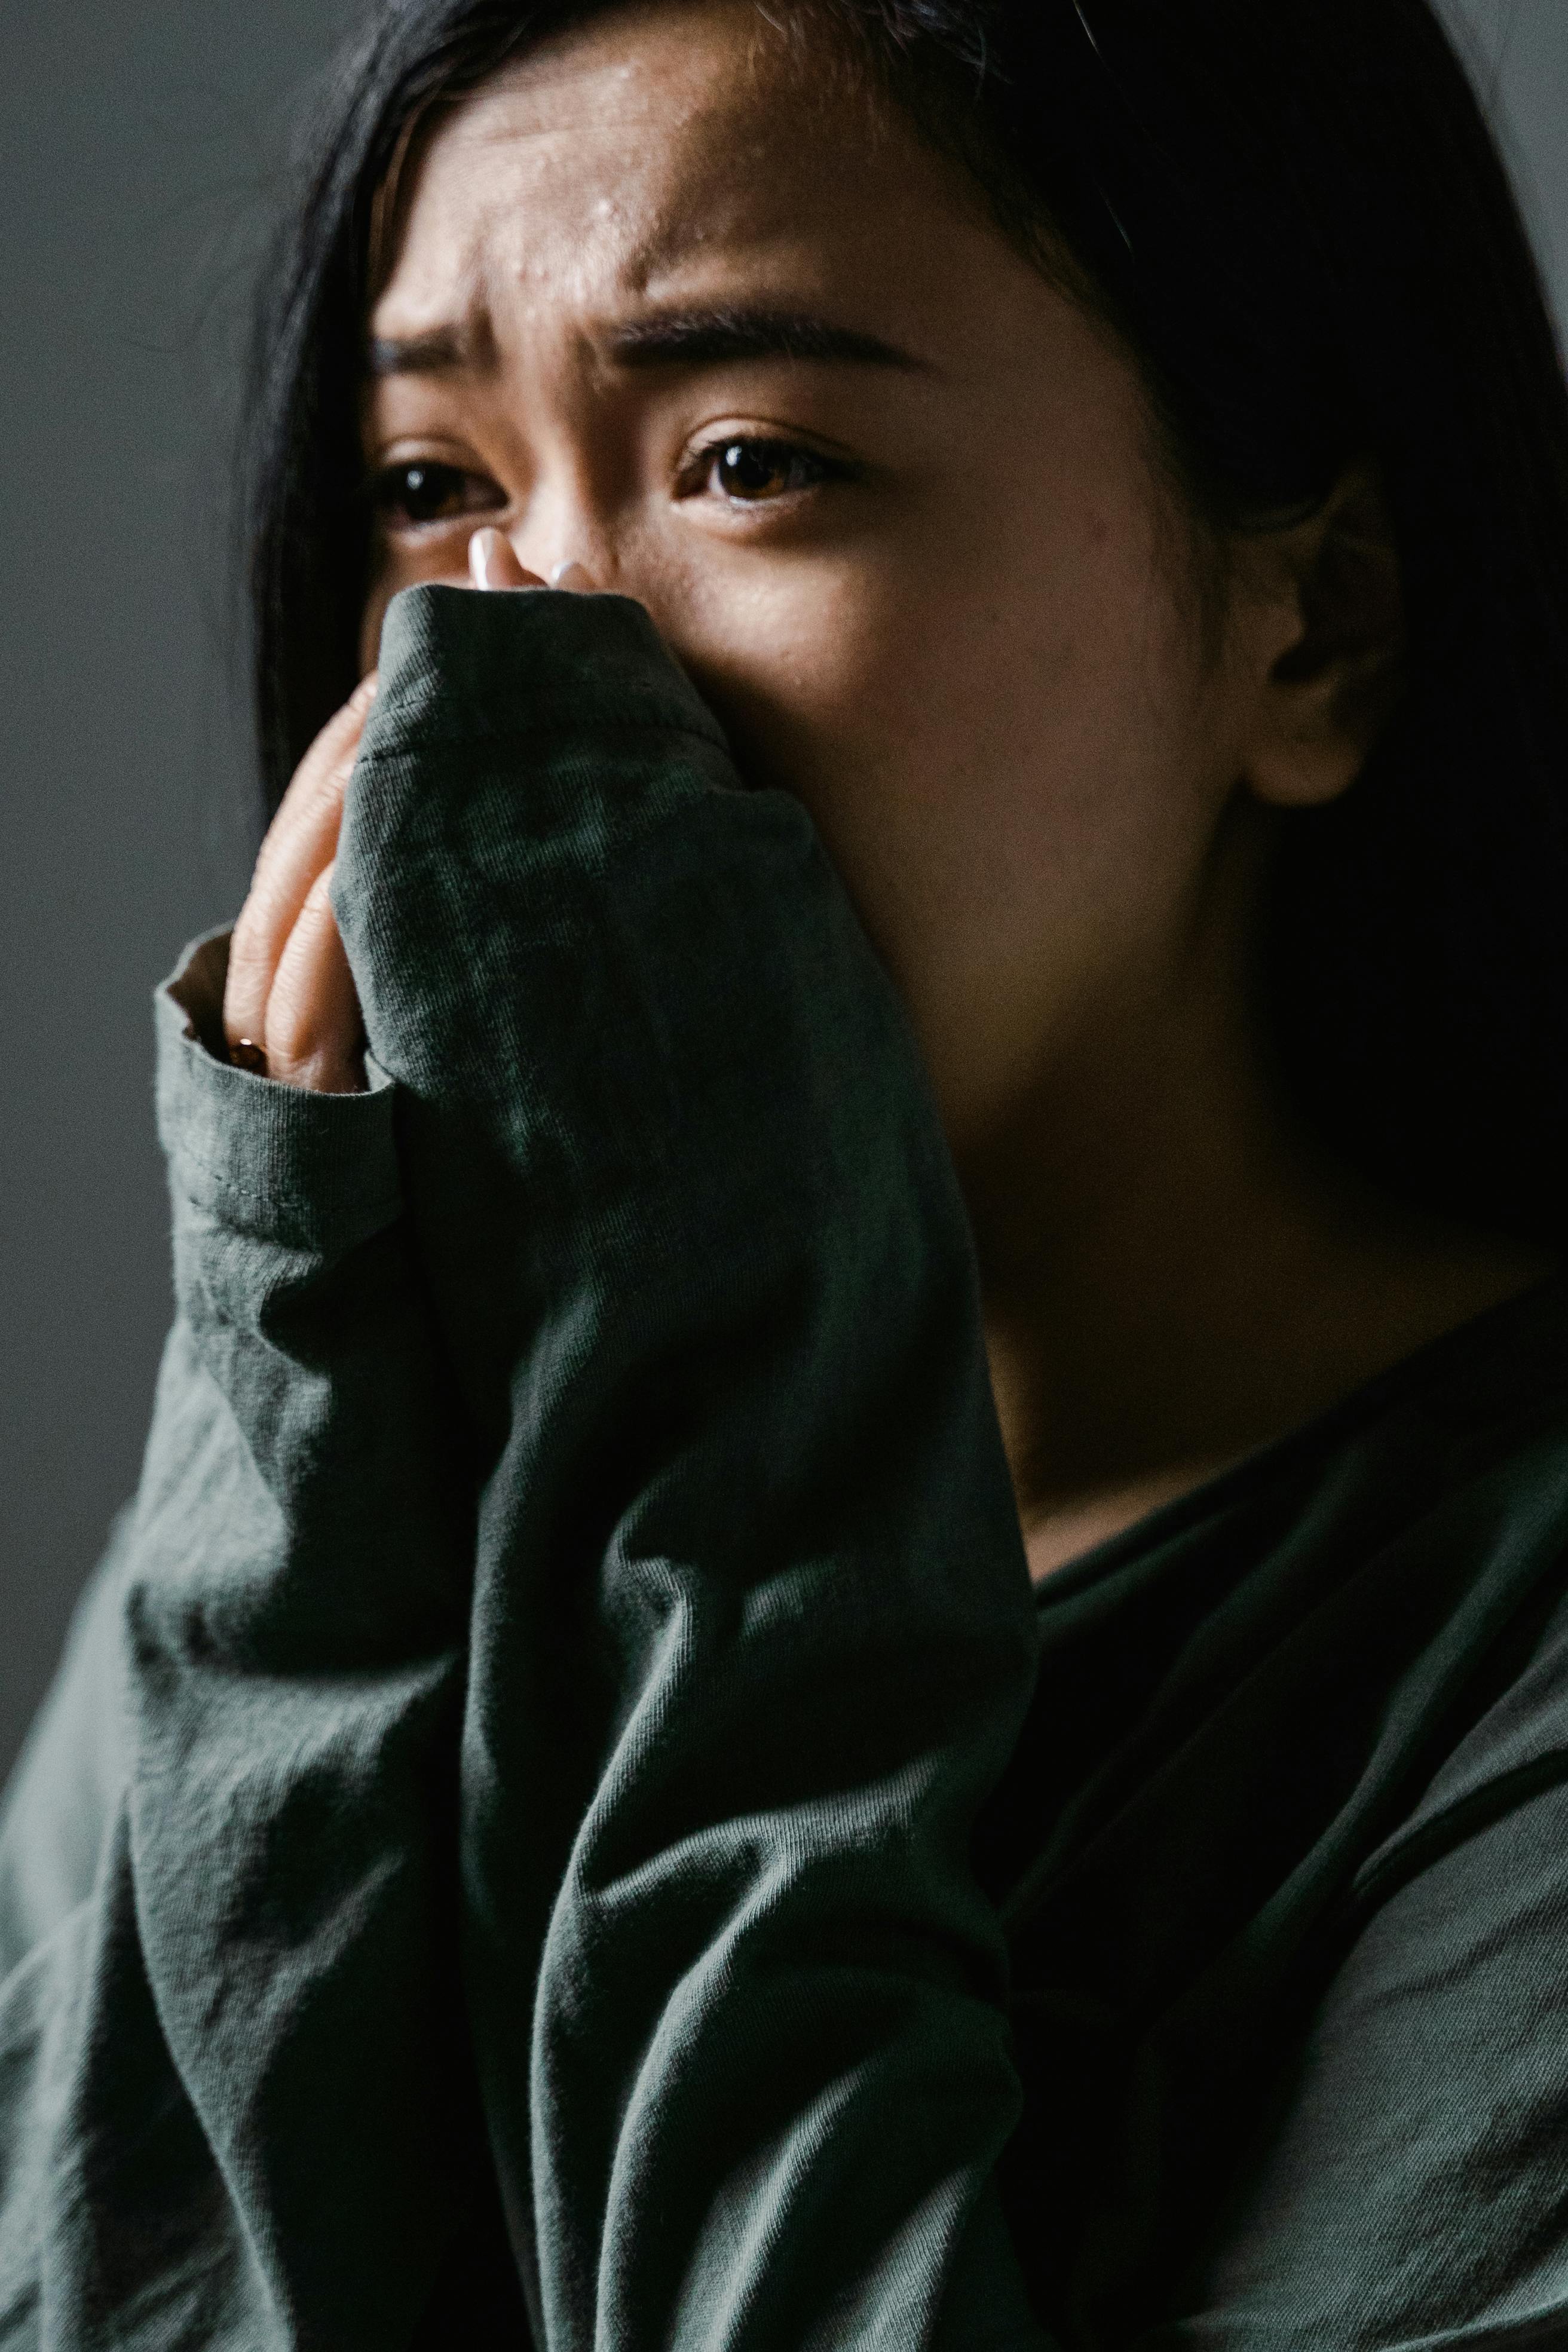 A woman covering her mouth | Source: Pexels